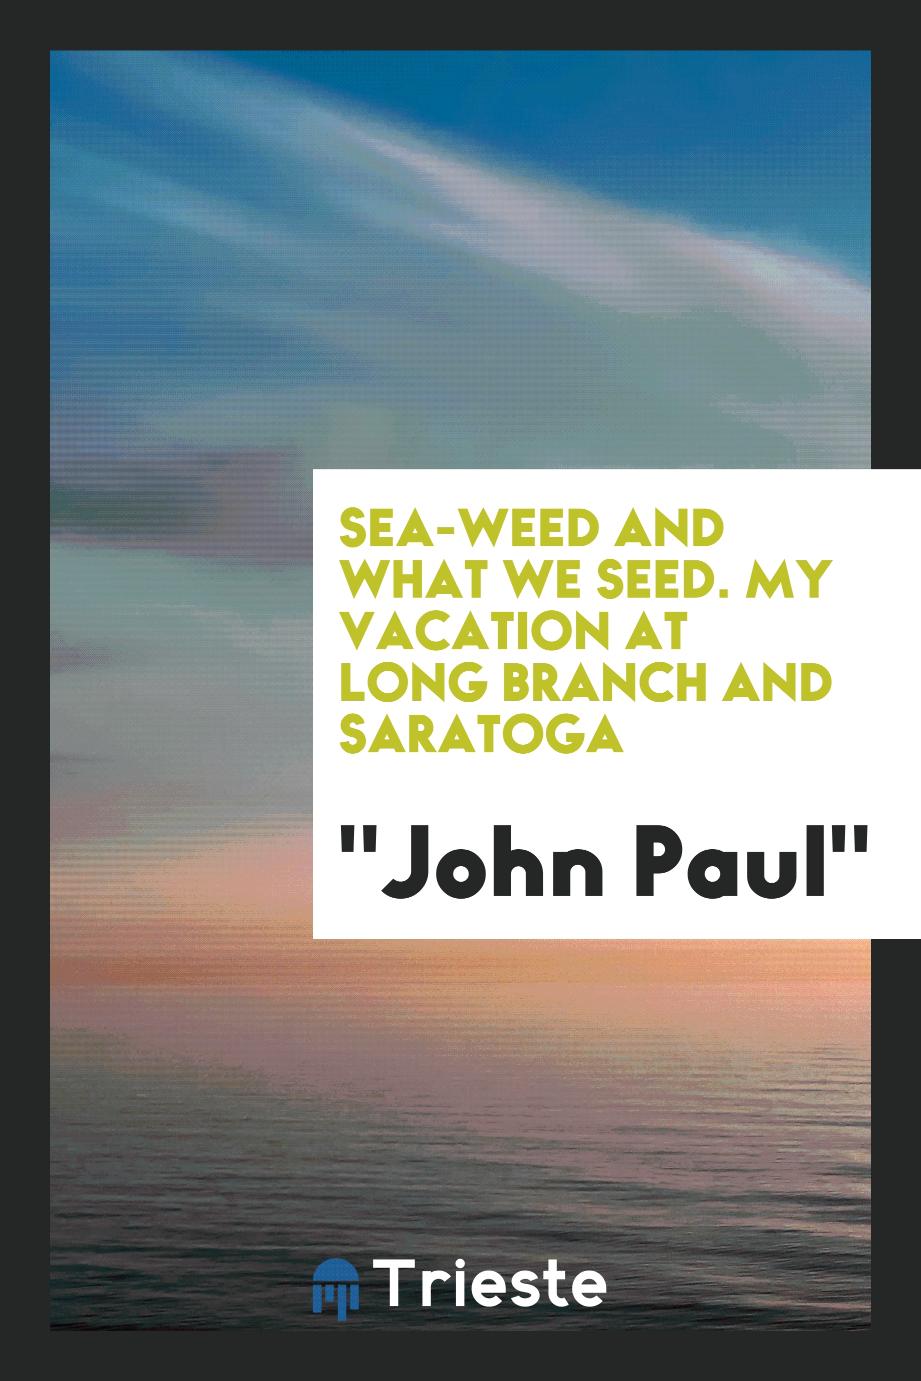 Sea-weed and what we seed. My vacation at Long Branch and Saratoga